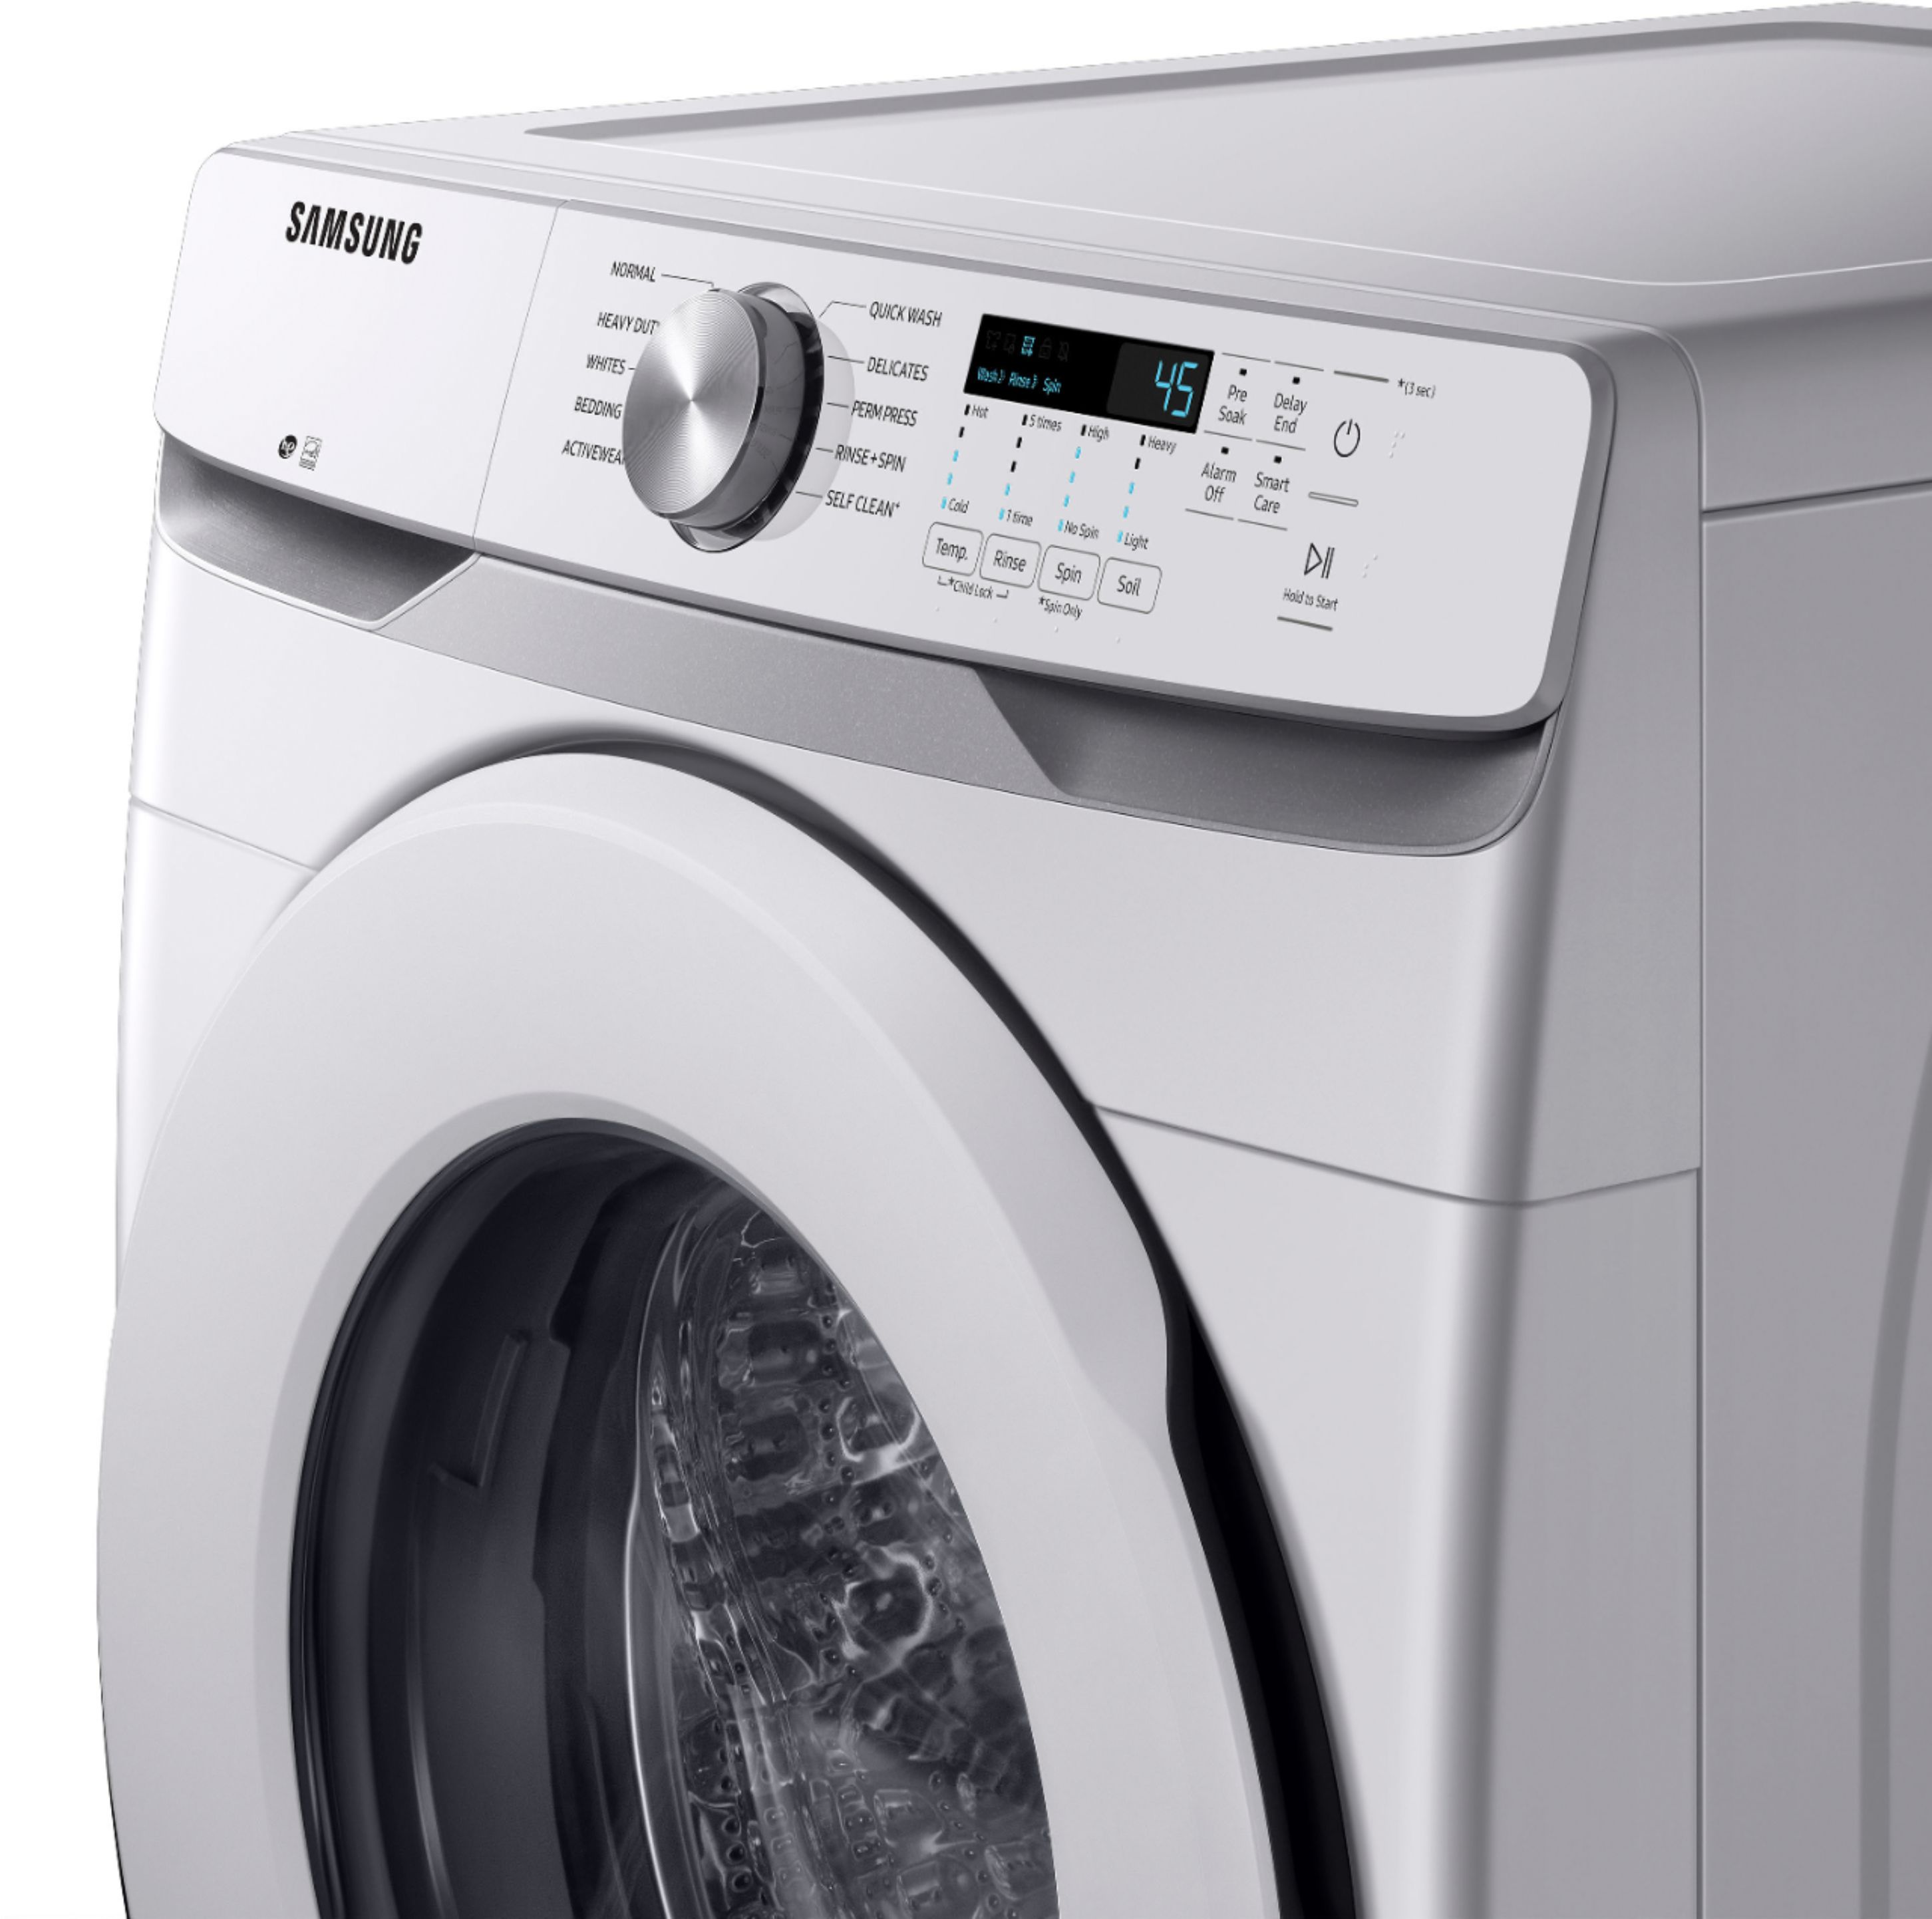 Samsung 4.5 cu. ft. High-Efficiency Front Load Washer with Self-Clean+ in  White WF45T6000AW - The Home Depot